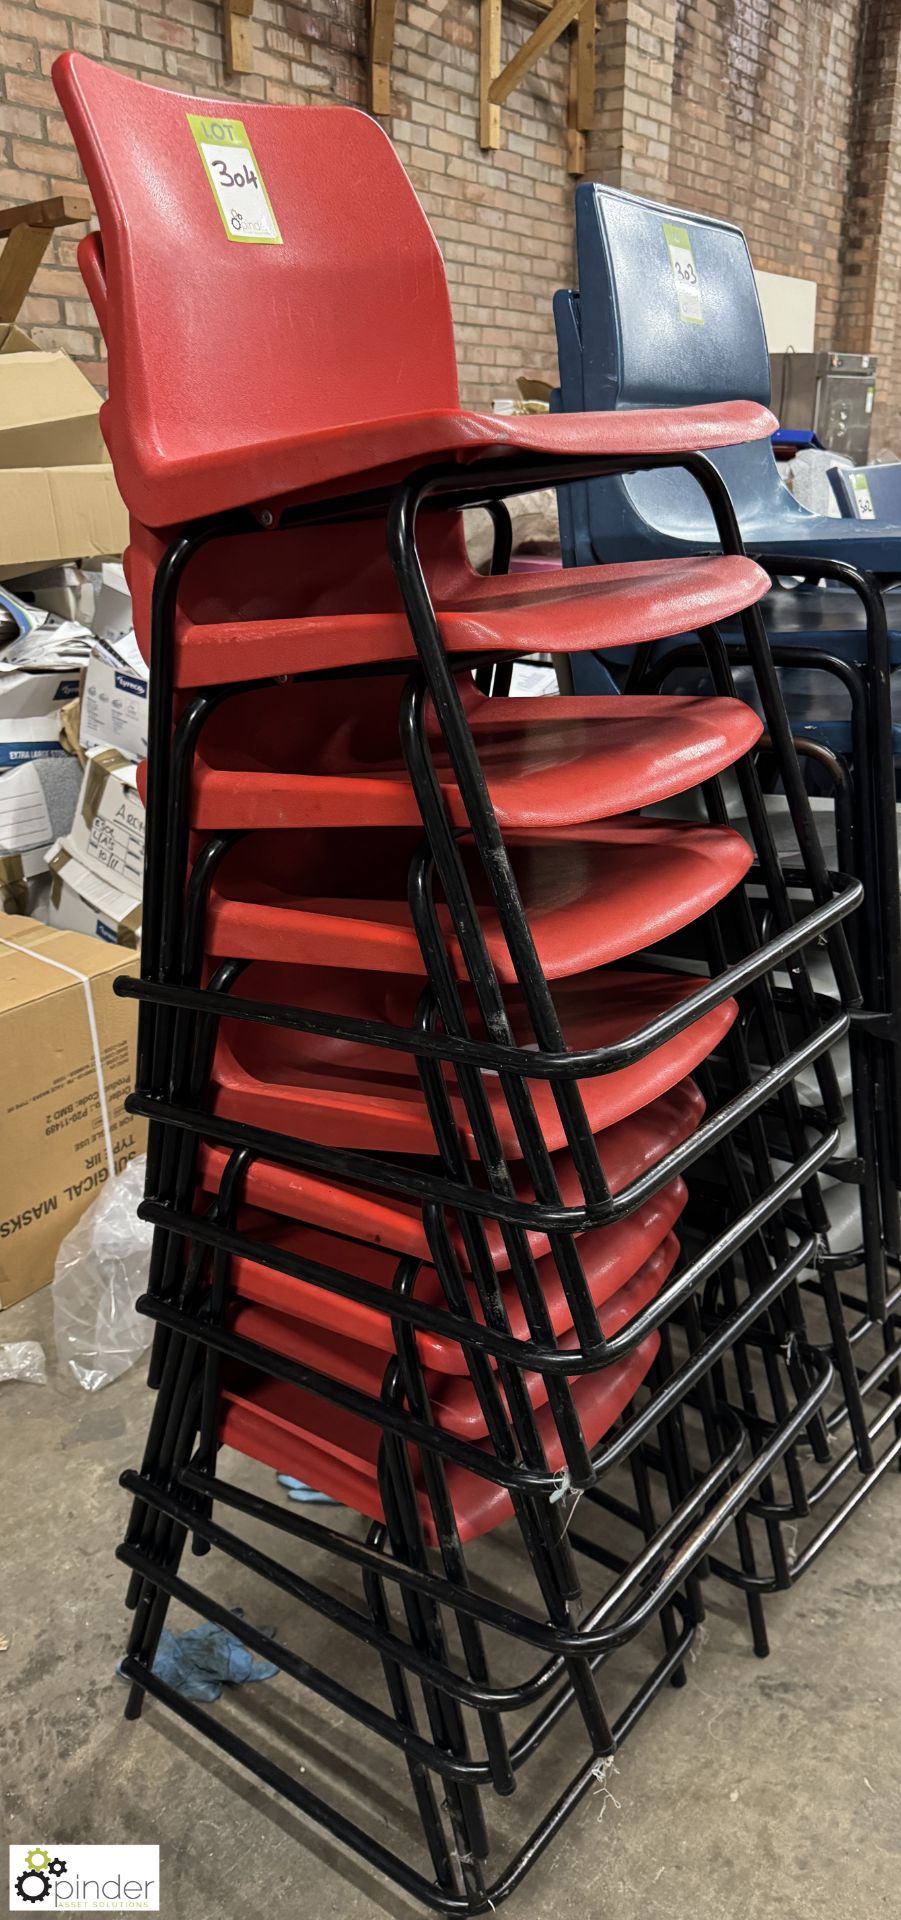 9 tubular framed plastic Stacking Chairs, red - Image 2 of 3